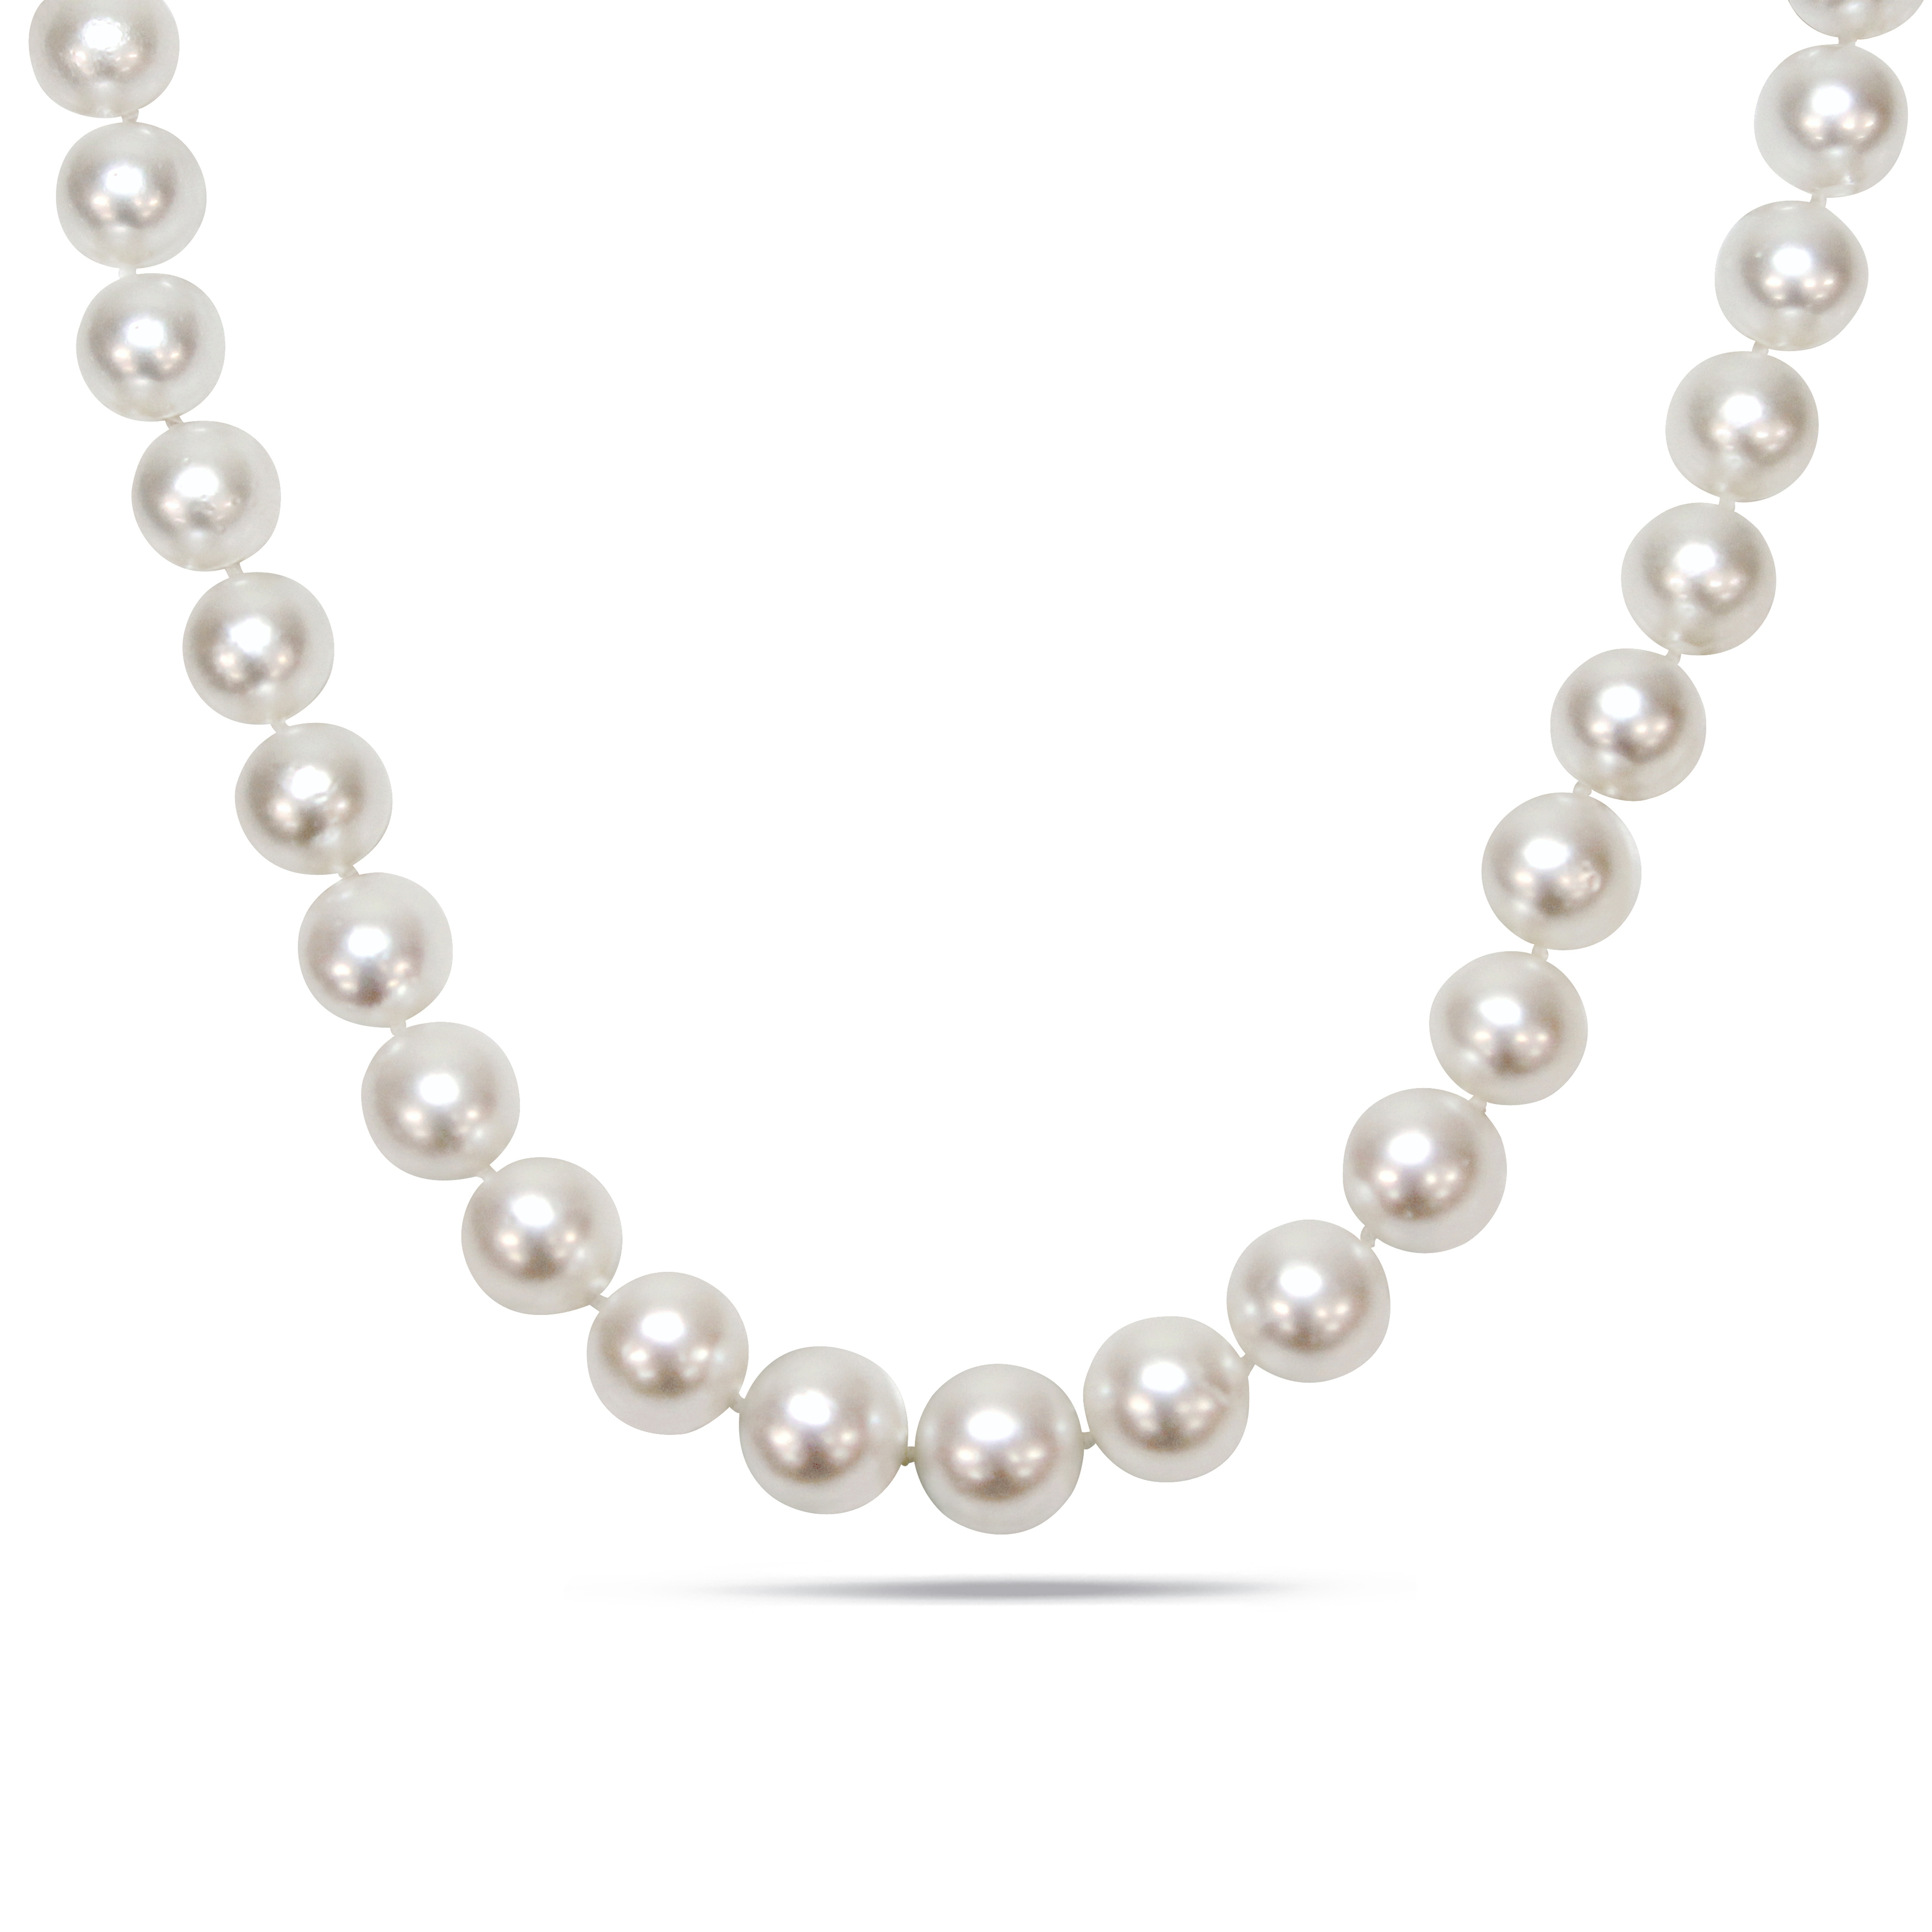 9-11 MM South Sea Pearl Graduated Strand Necklace with 14k Yellow Gold Ball Clasp - 18 in